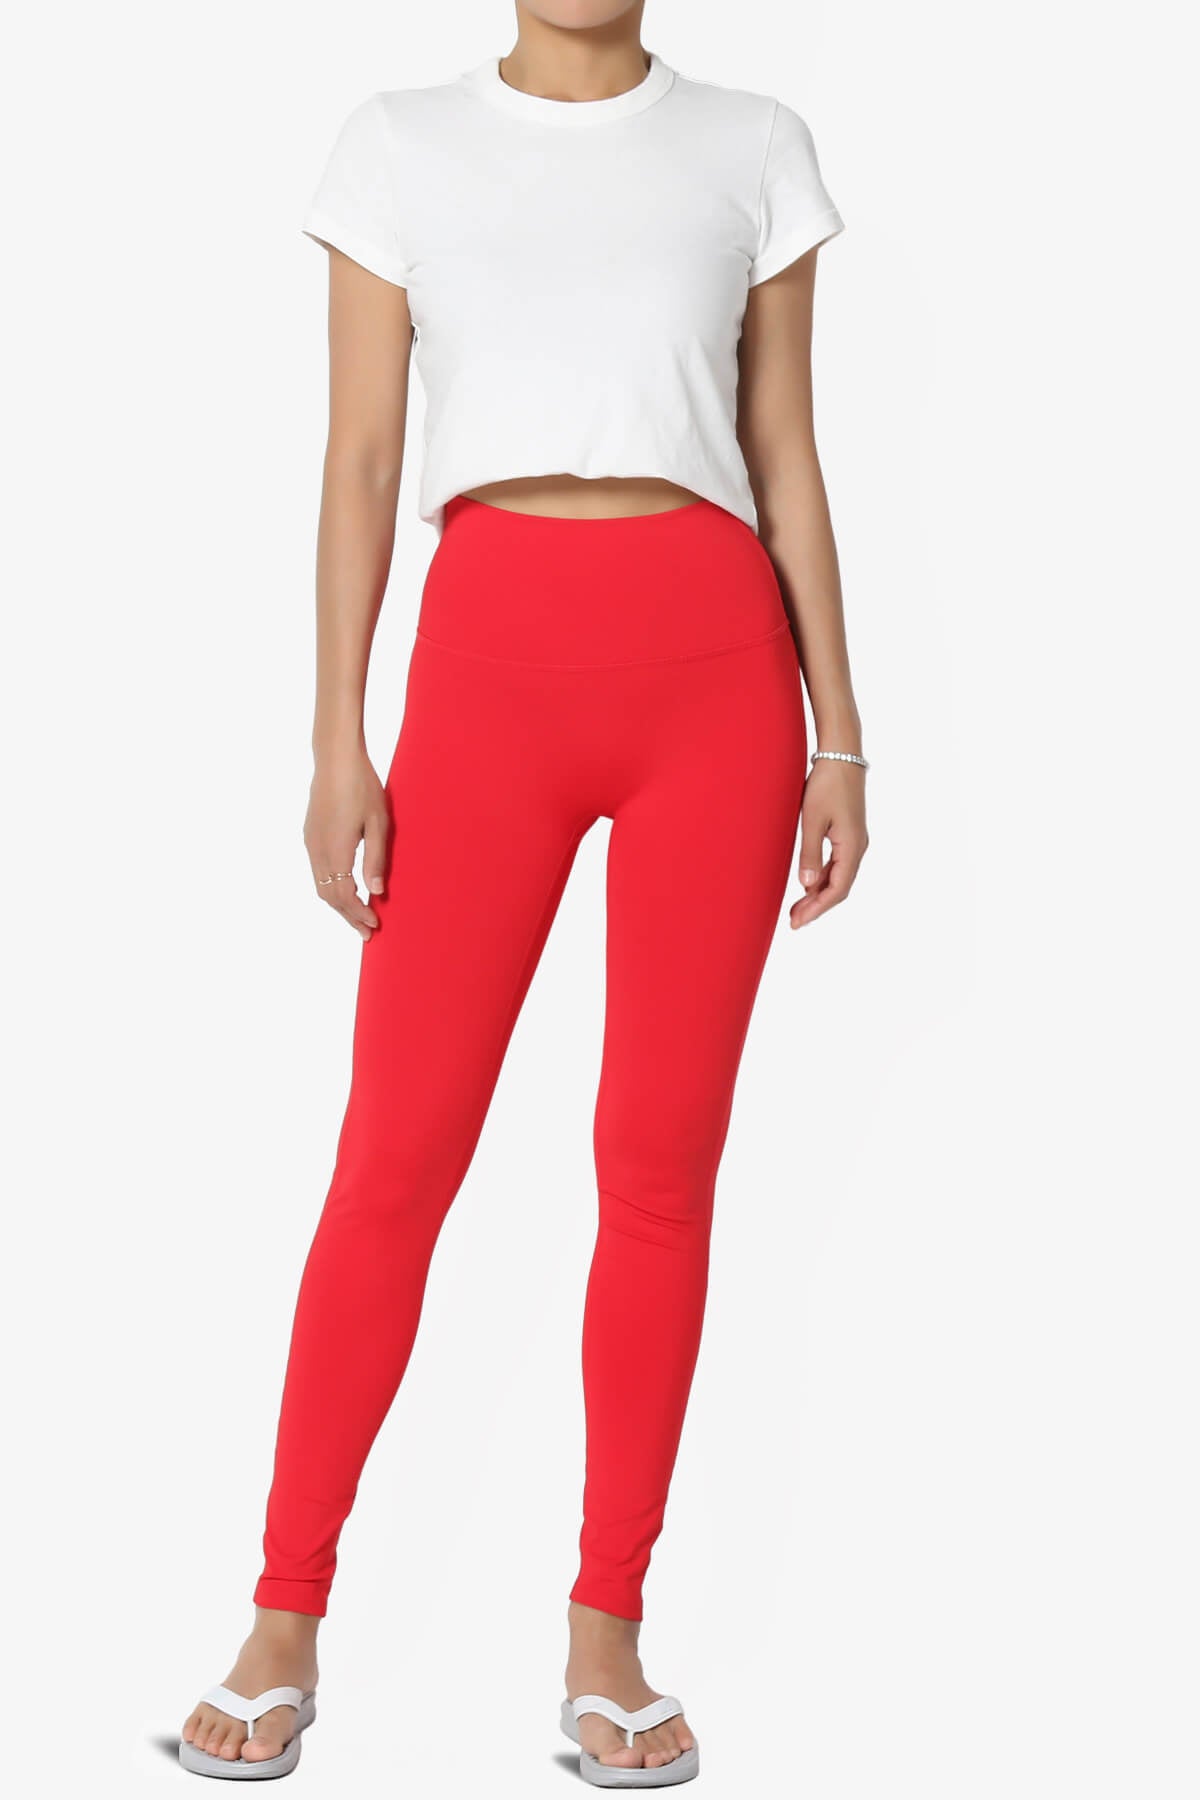 Mosco Athletic High Rise Ankle Leggings RED_6